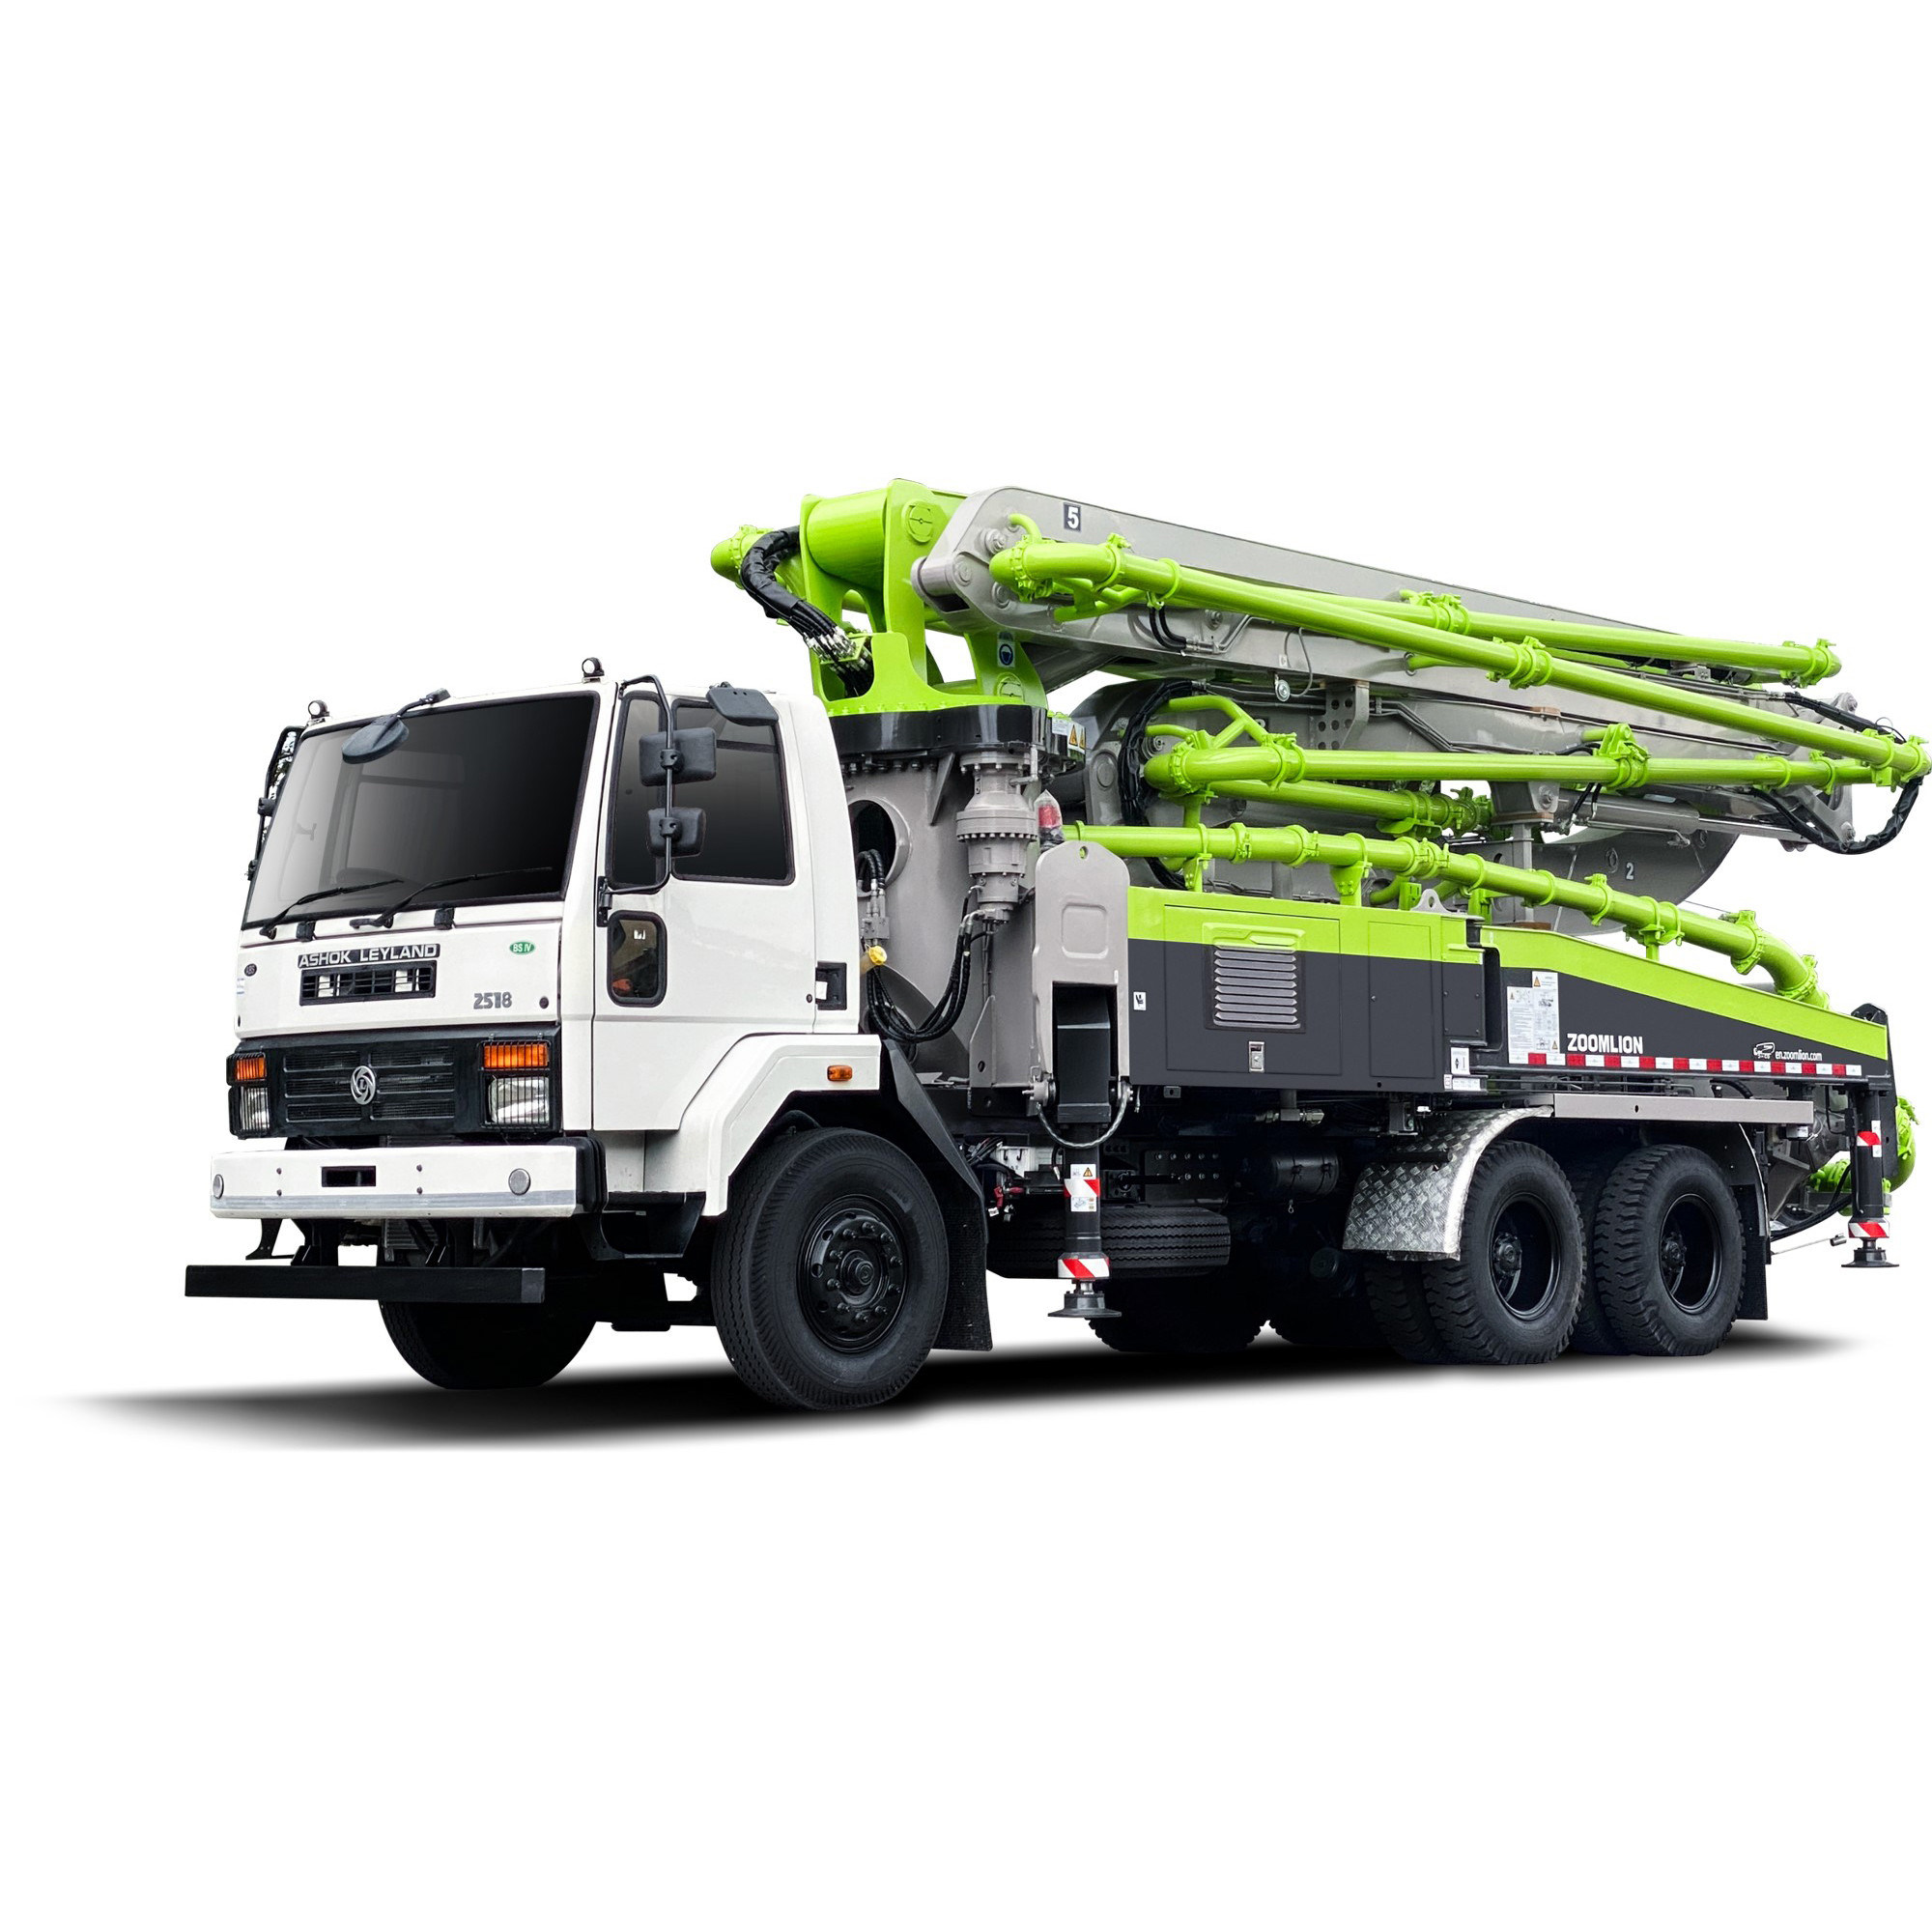 Zoomlion Hot Sale Truck Mounted Concrete Pump 38X-5rz with 100m3/H Max Theorical Output and 38m Vertical Reach